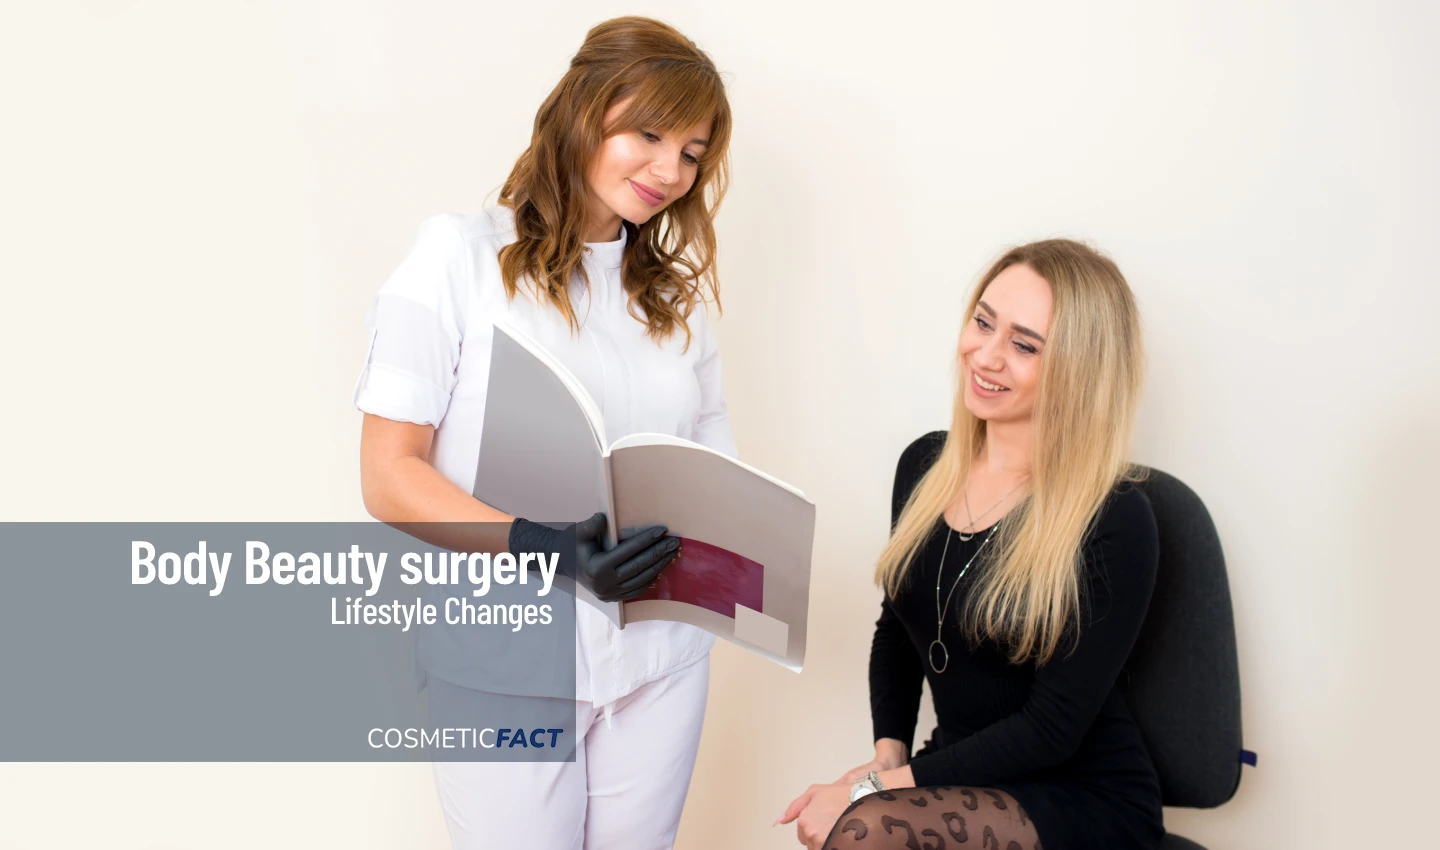 A patient and doctor discussing recovery tips after body beauty surgery, emphasizing the importance of avoiding common mistakes.